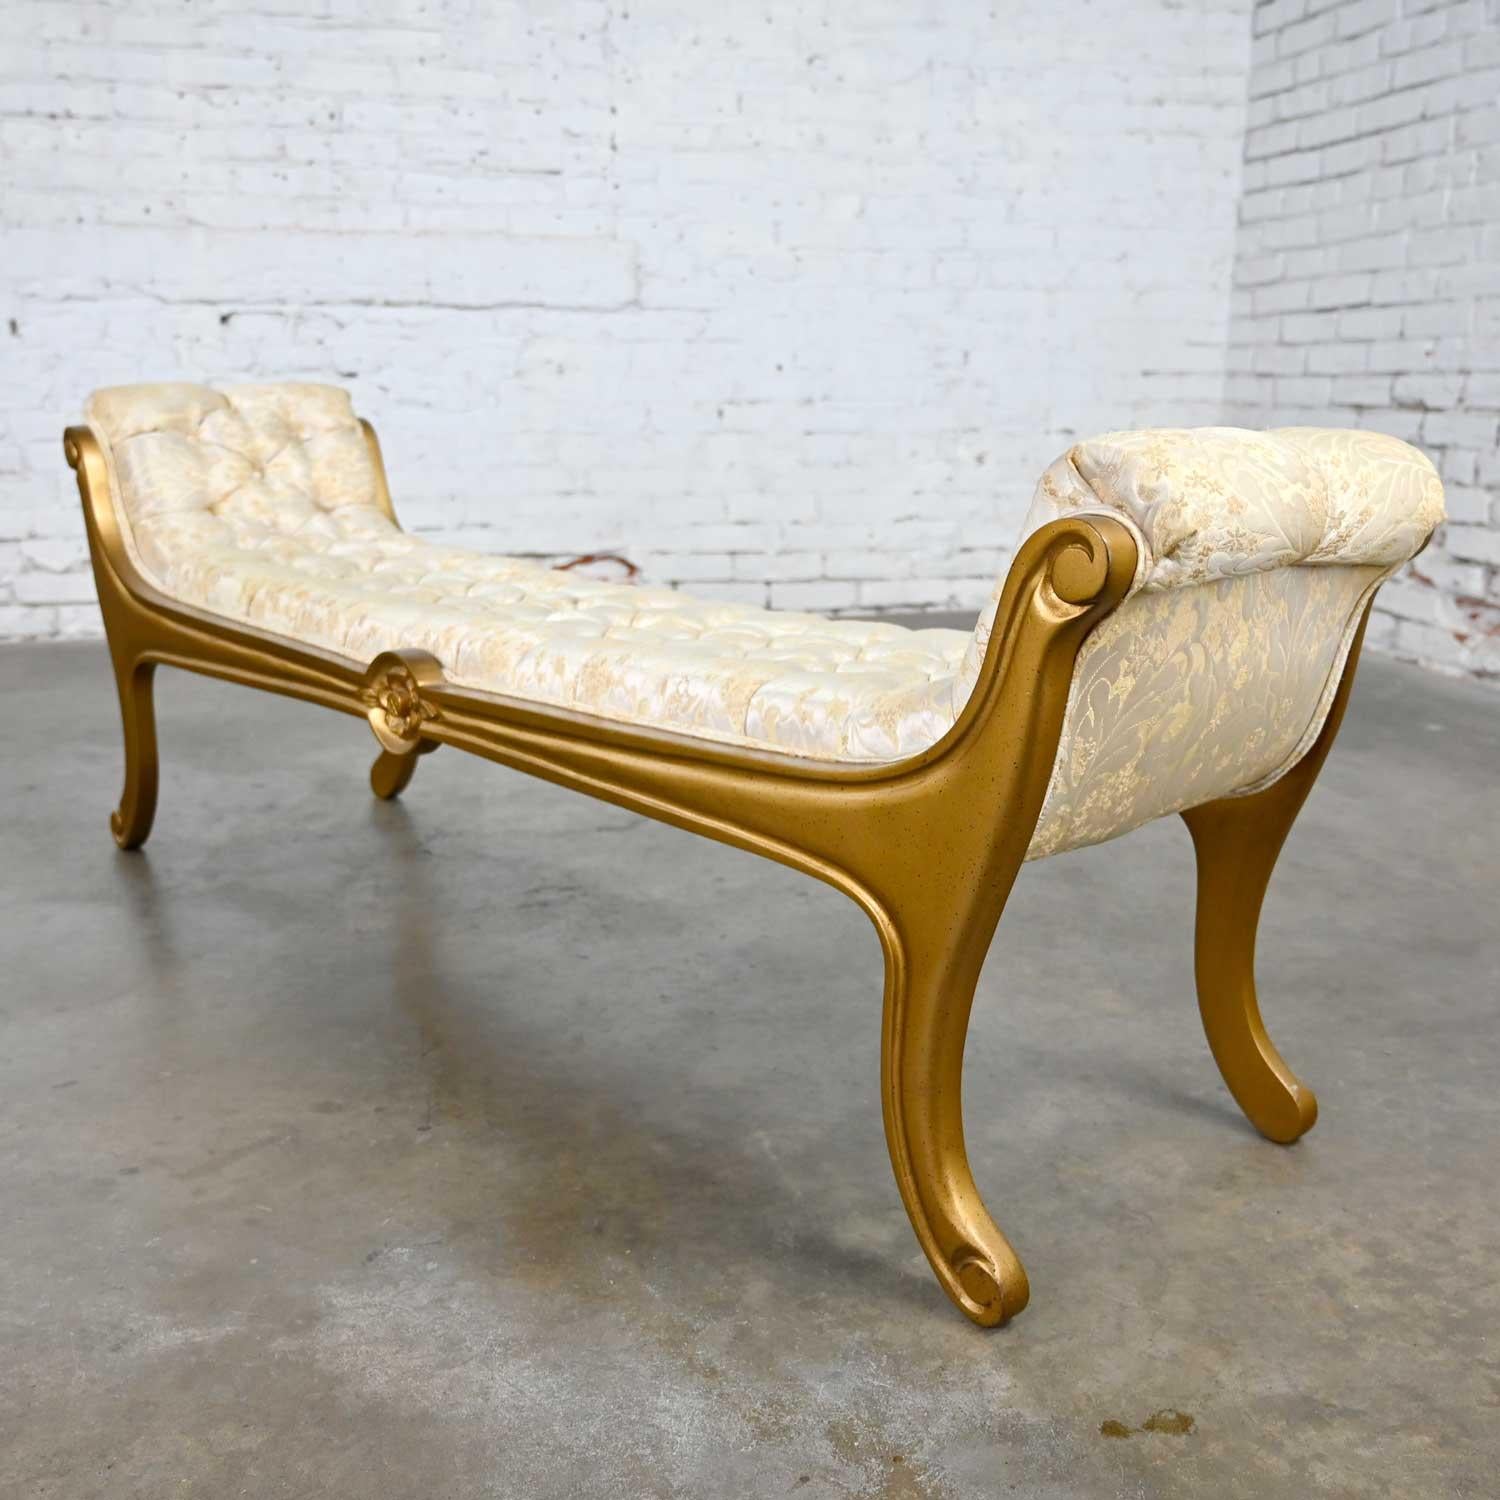 Fabric Hollywood Regency Upholstered Gilded Gondola Bench Attributed to Prince Howard